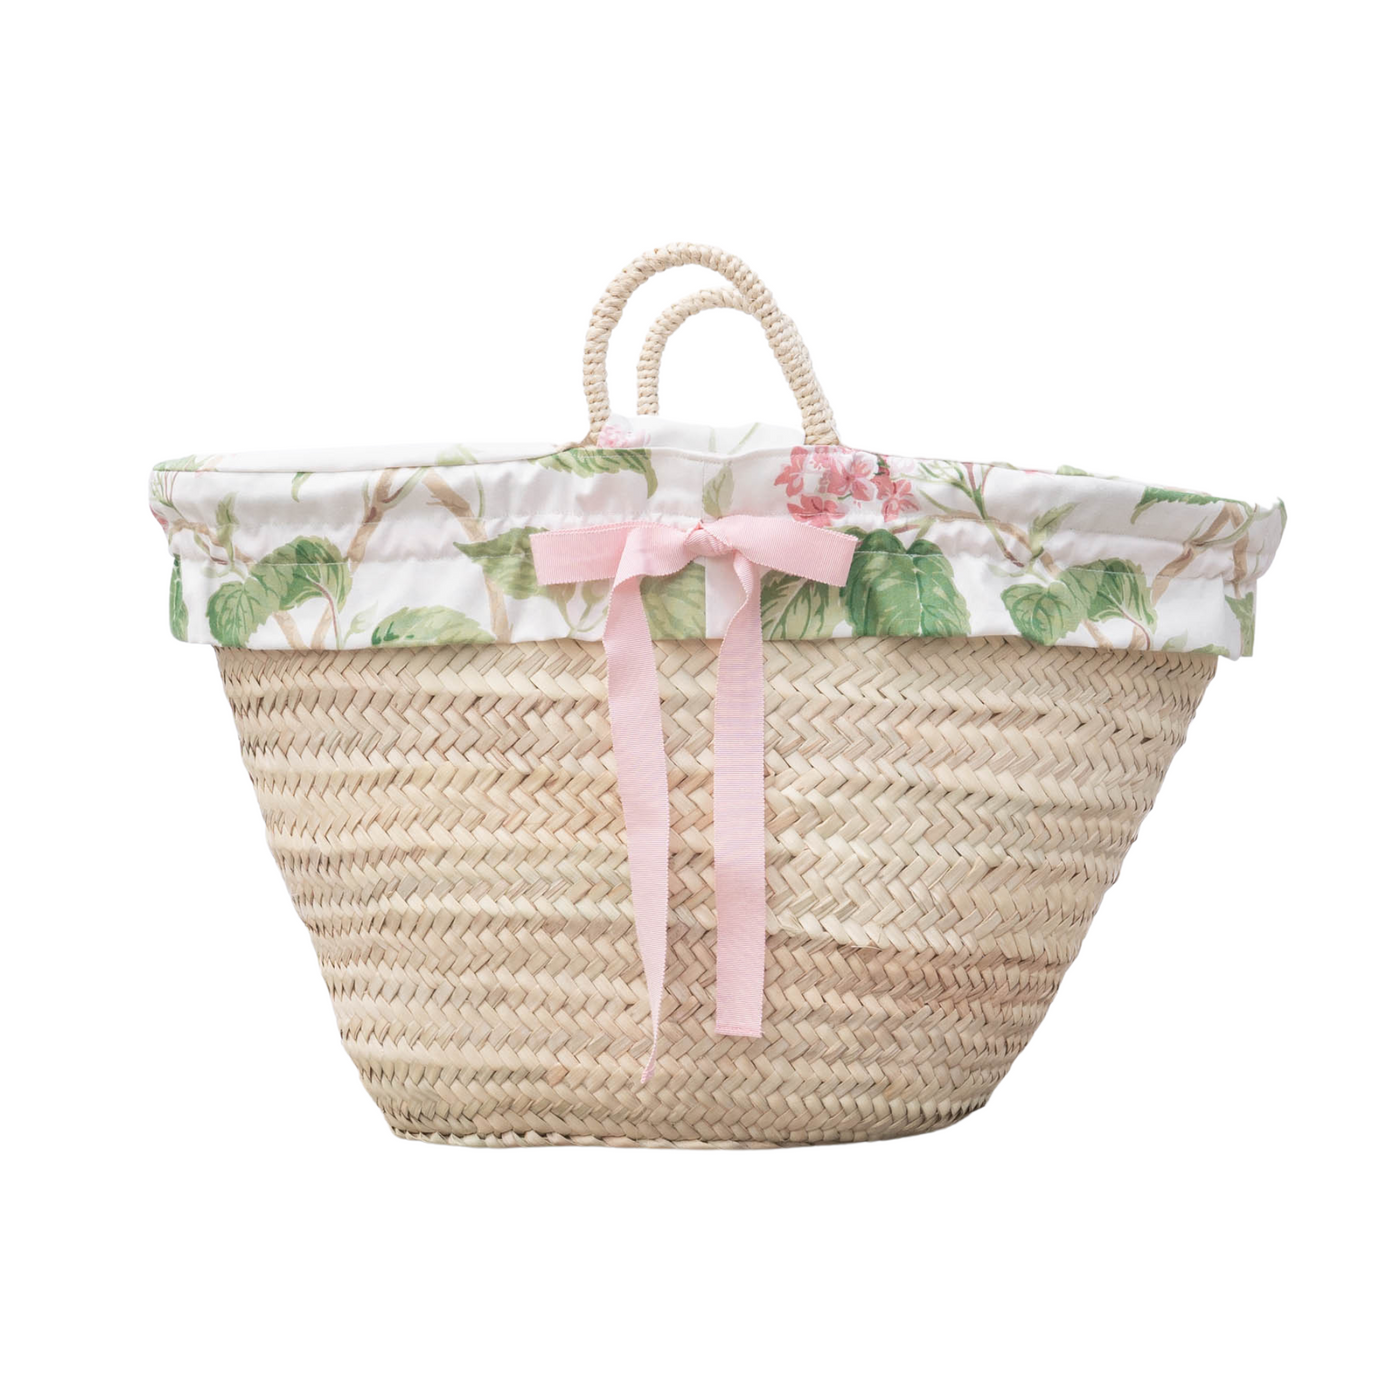 Colefax & Fowler Summerby Lined Market Basket - Maxine Makes